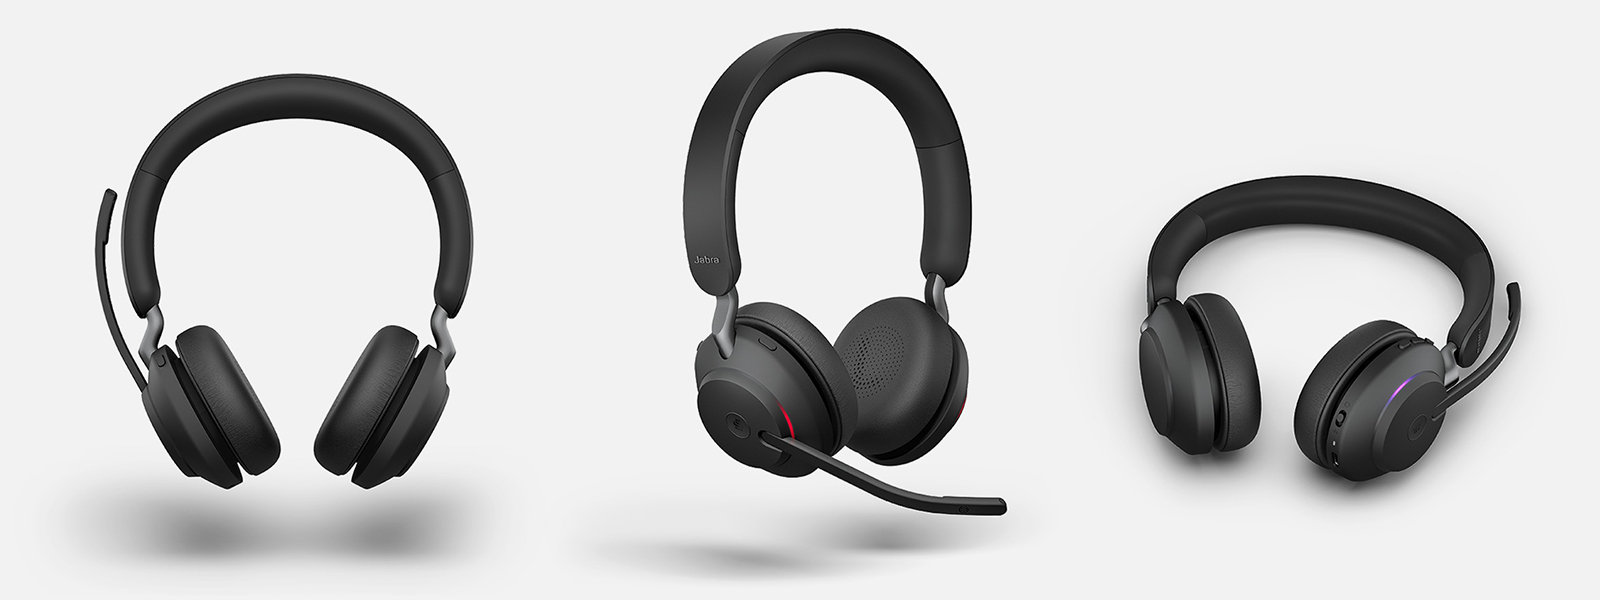 Three different angles of the Evolve2 65 wireless headphones with busy light on.